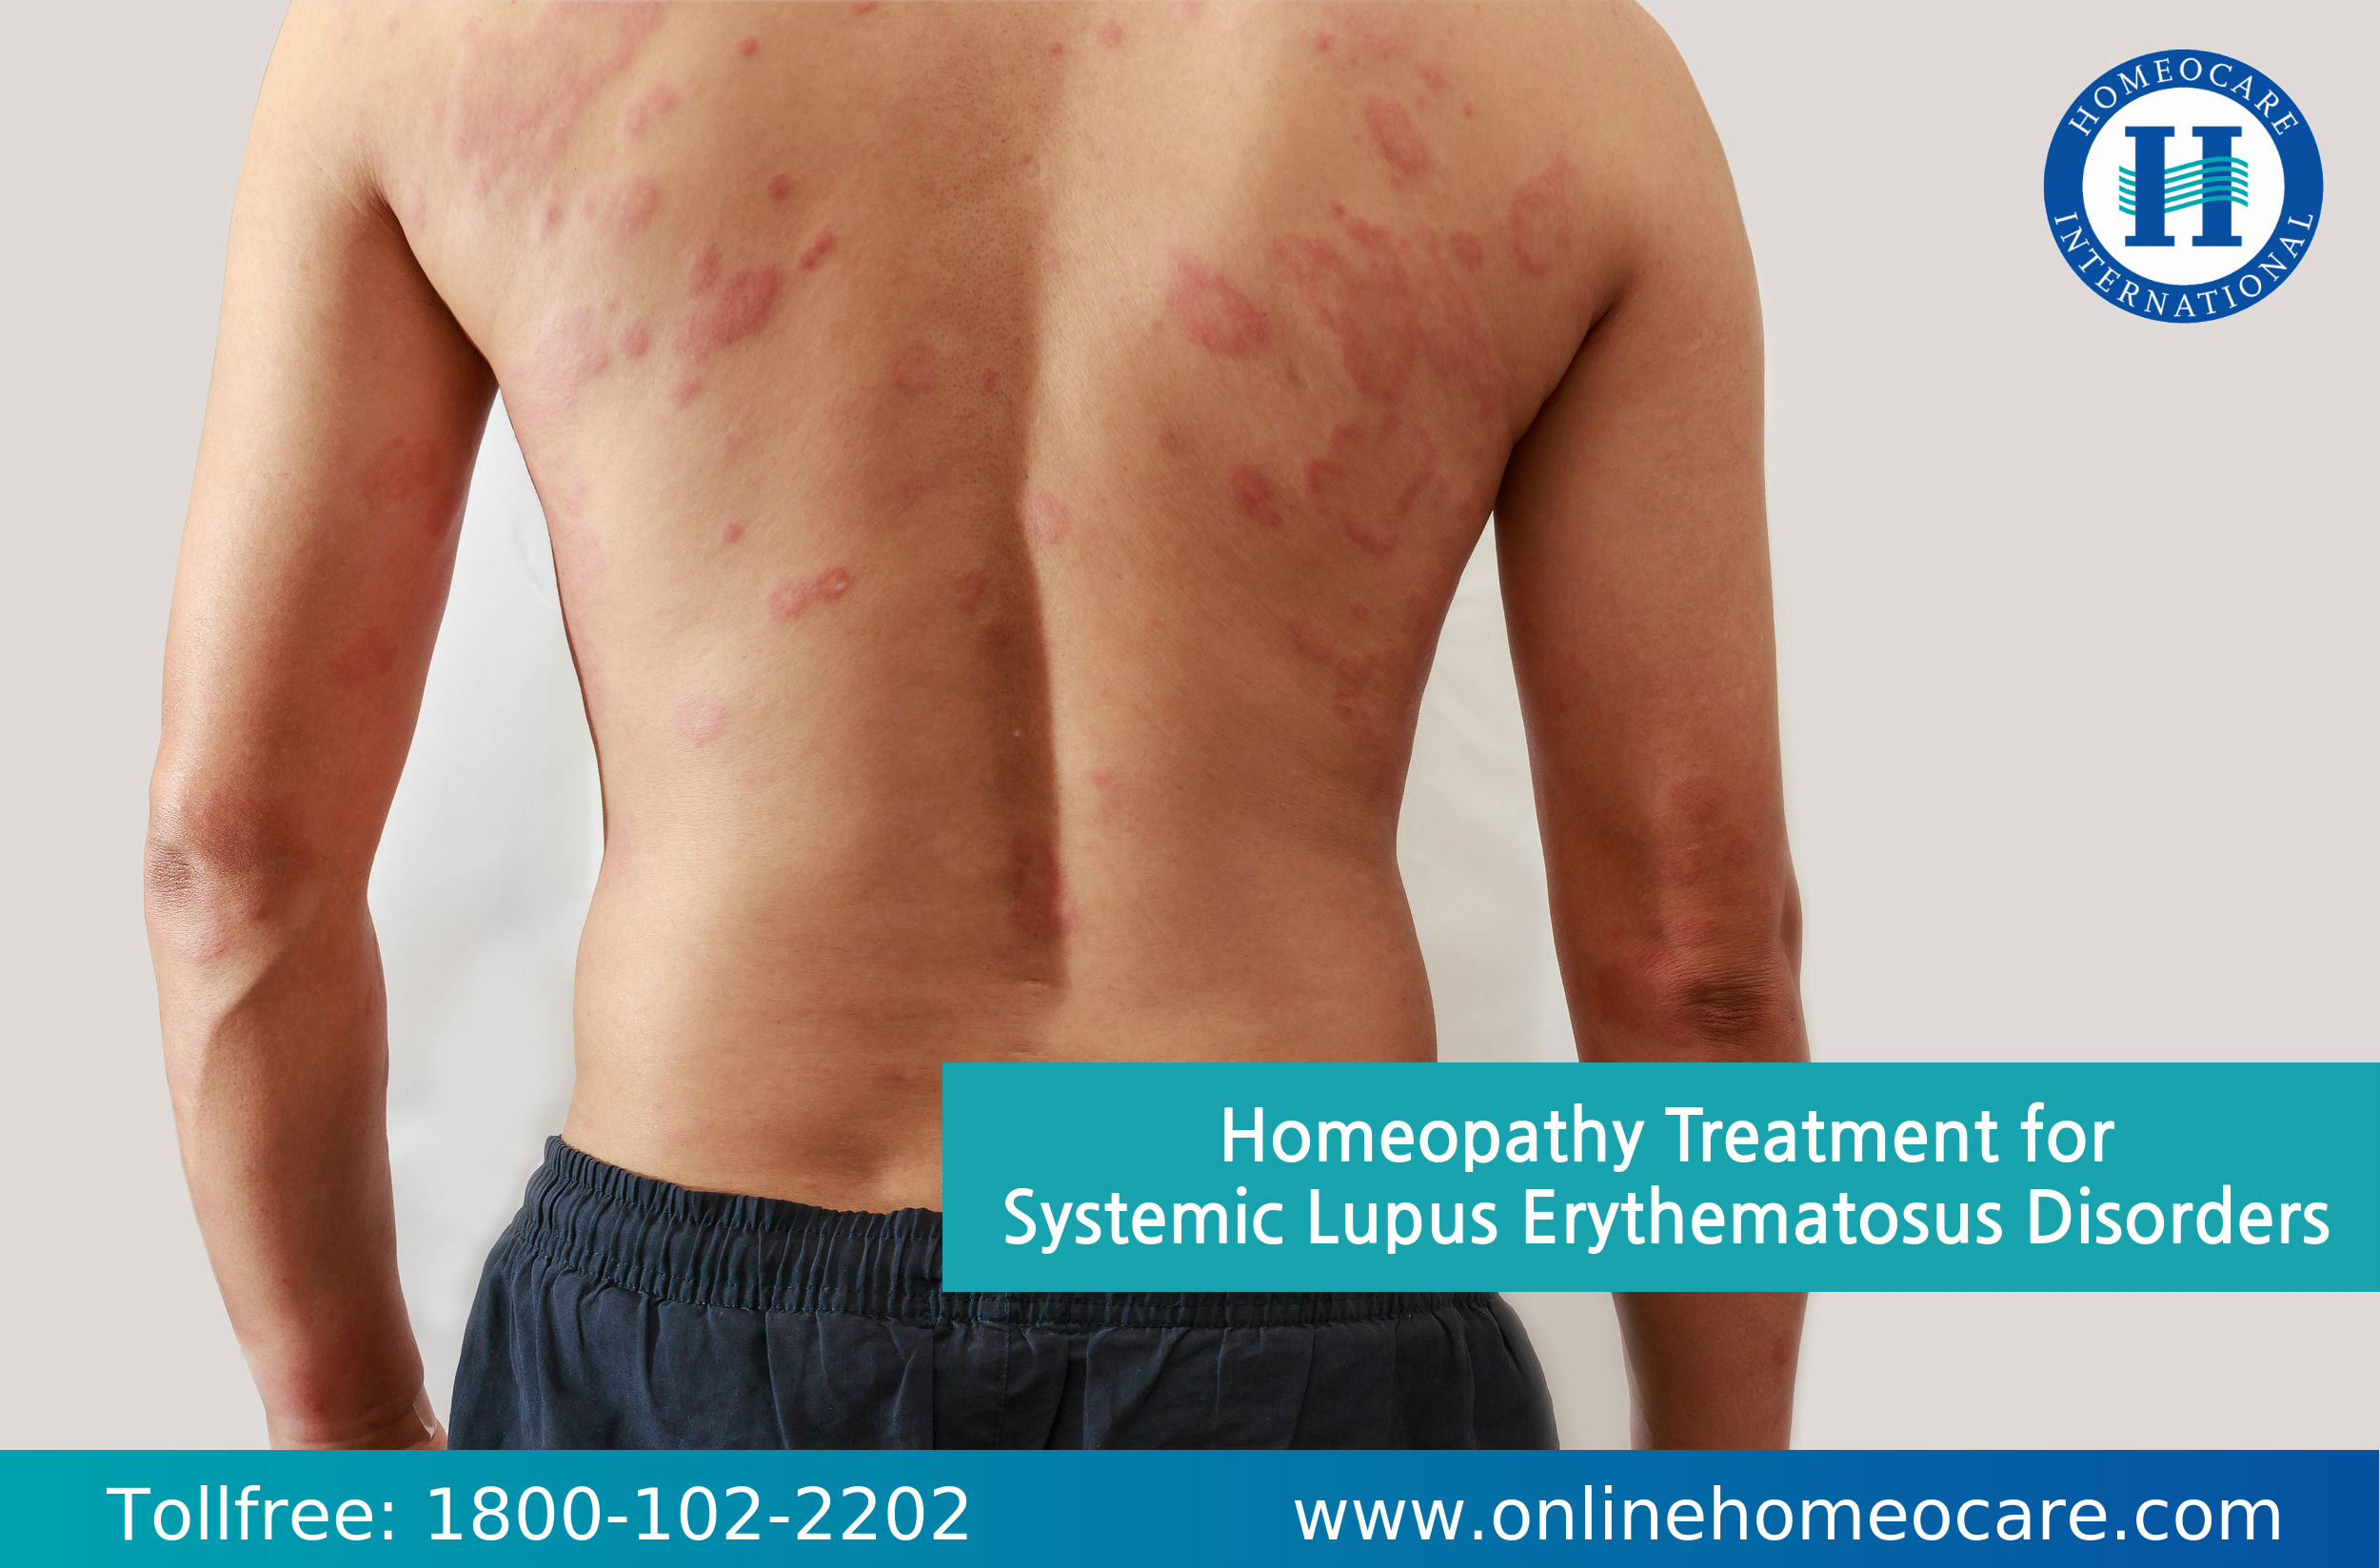 Homeopathy Treatment for Systemic Lupus Erythematosus Disorders